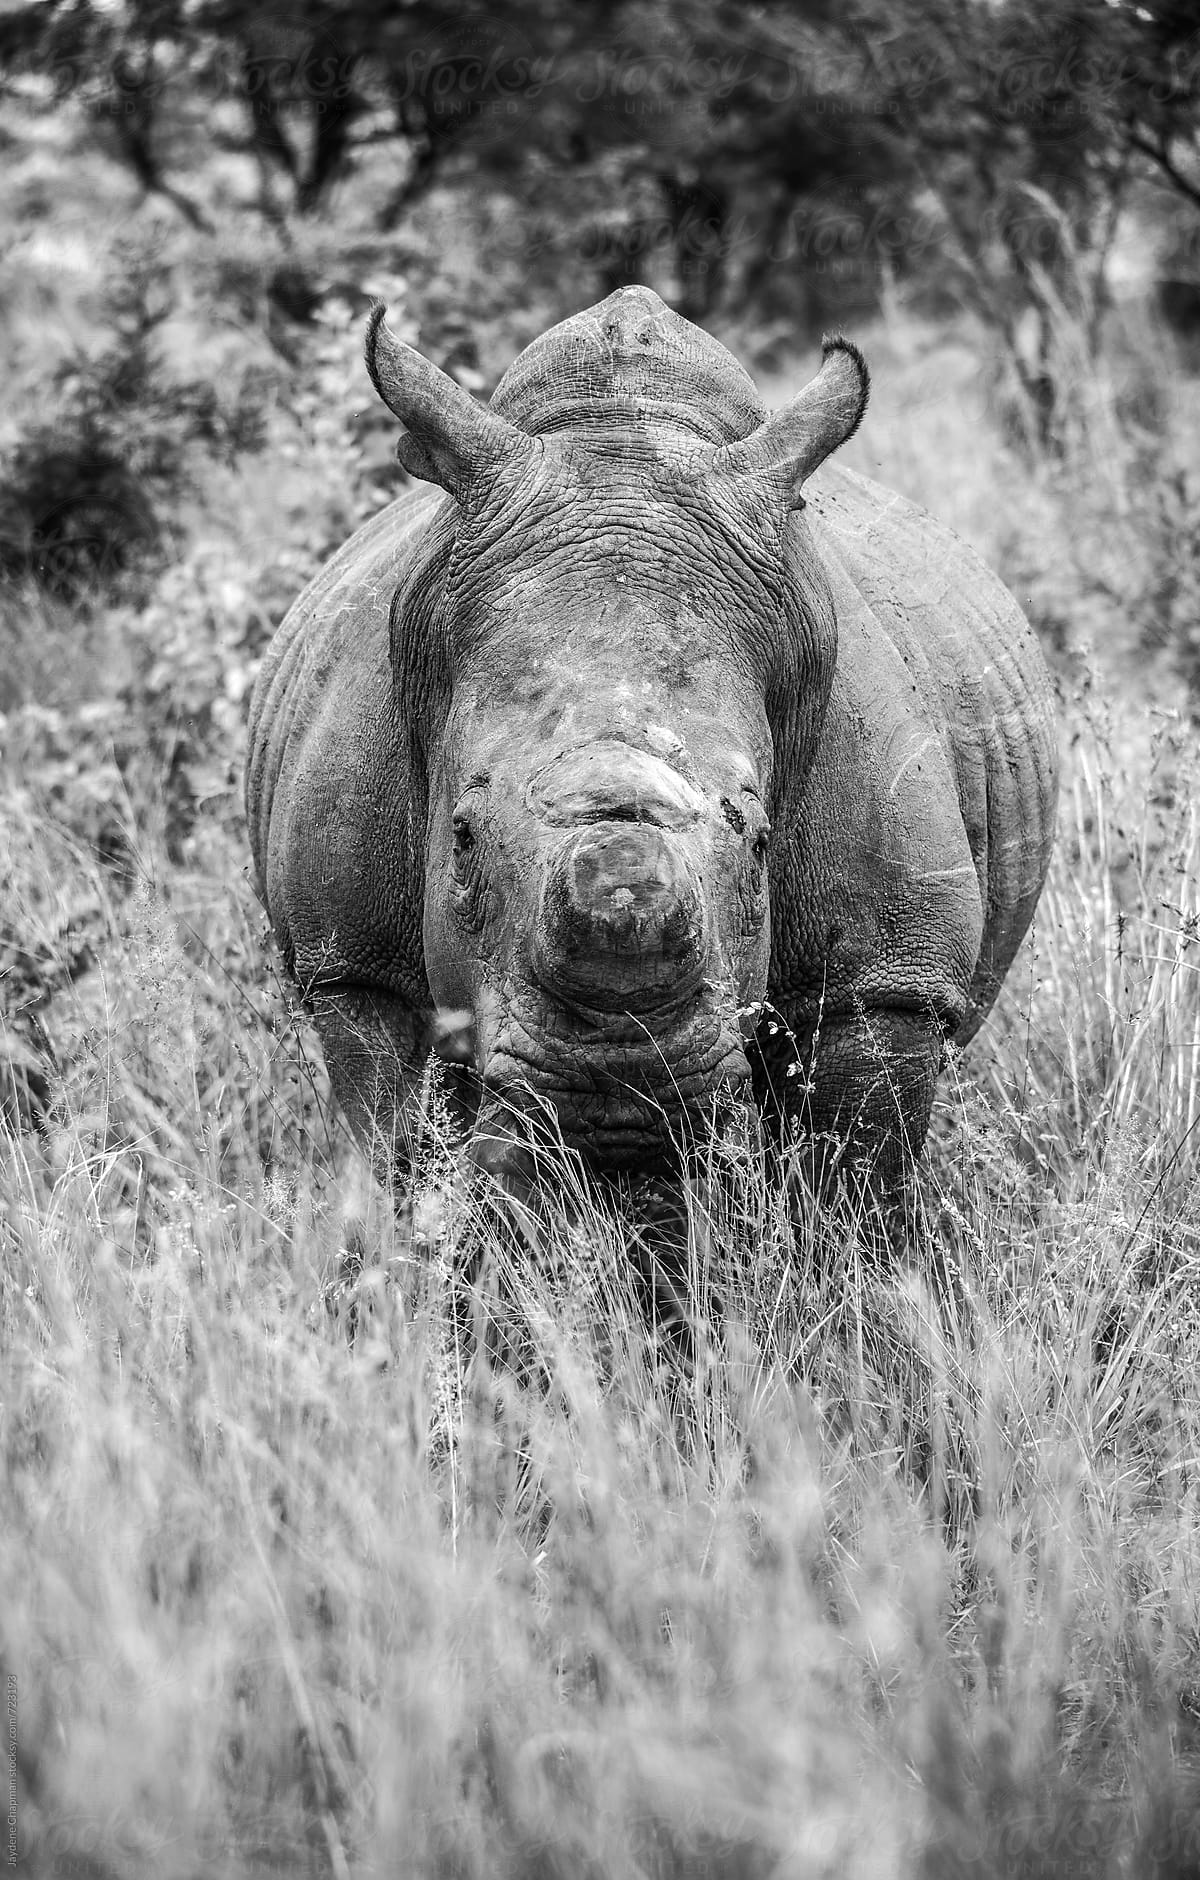 Rhino with horns cut off to stop poachers, Zimbabwe, Africa